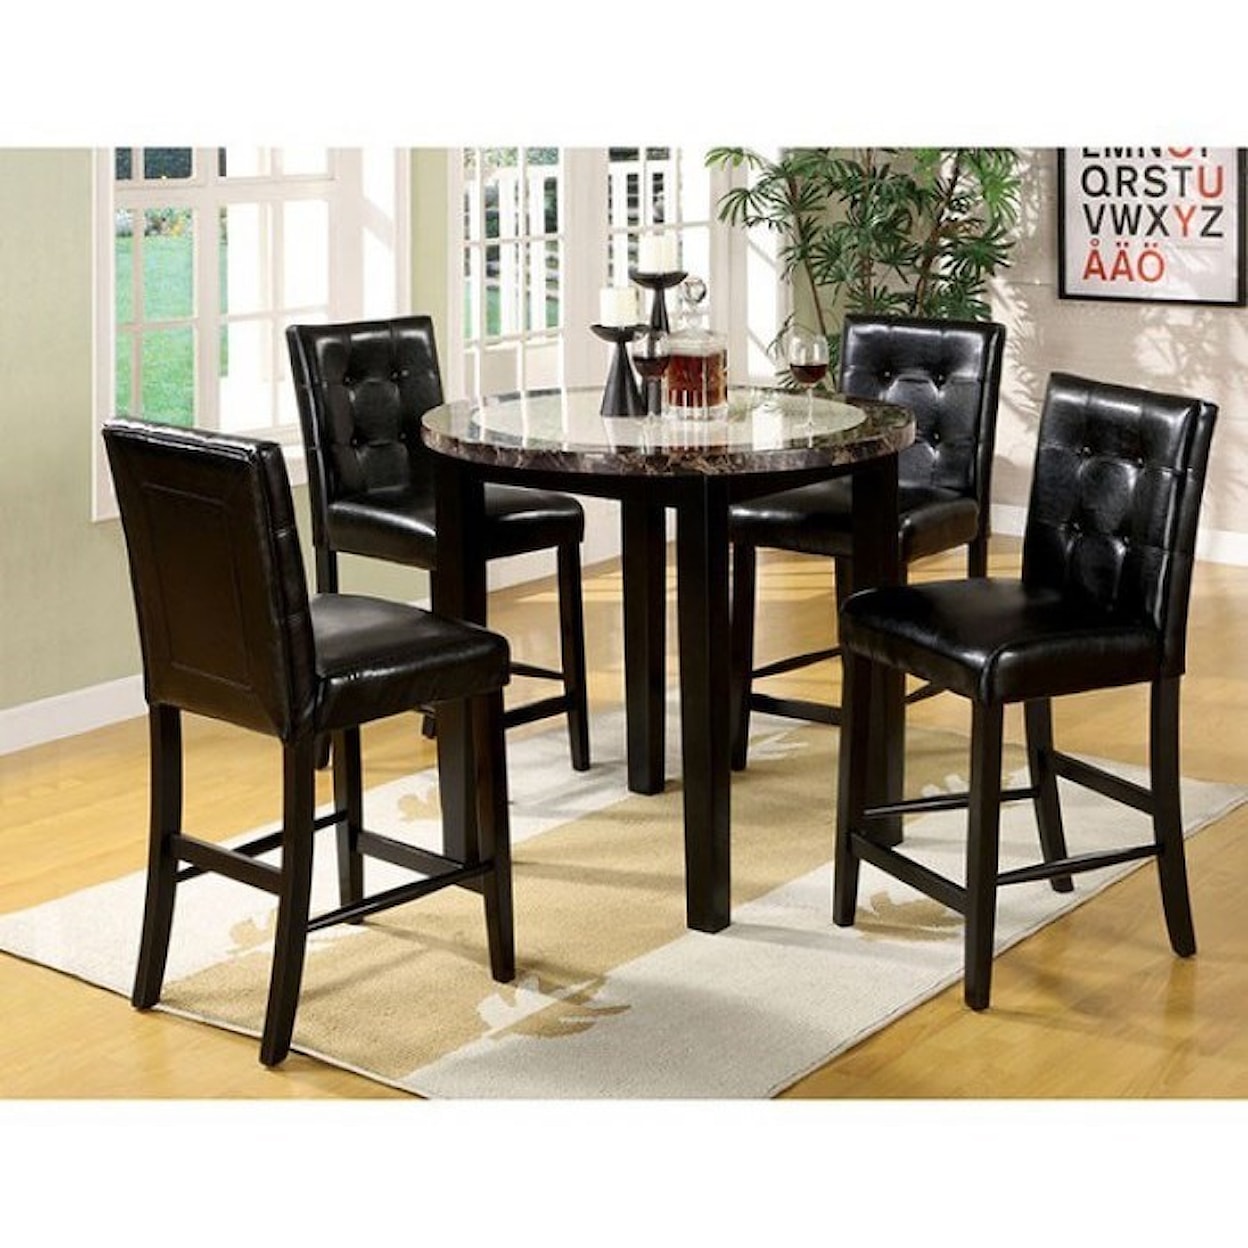 Furniture of America Atlas IV 5 Piece Counter Height Table and Stool Set